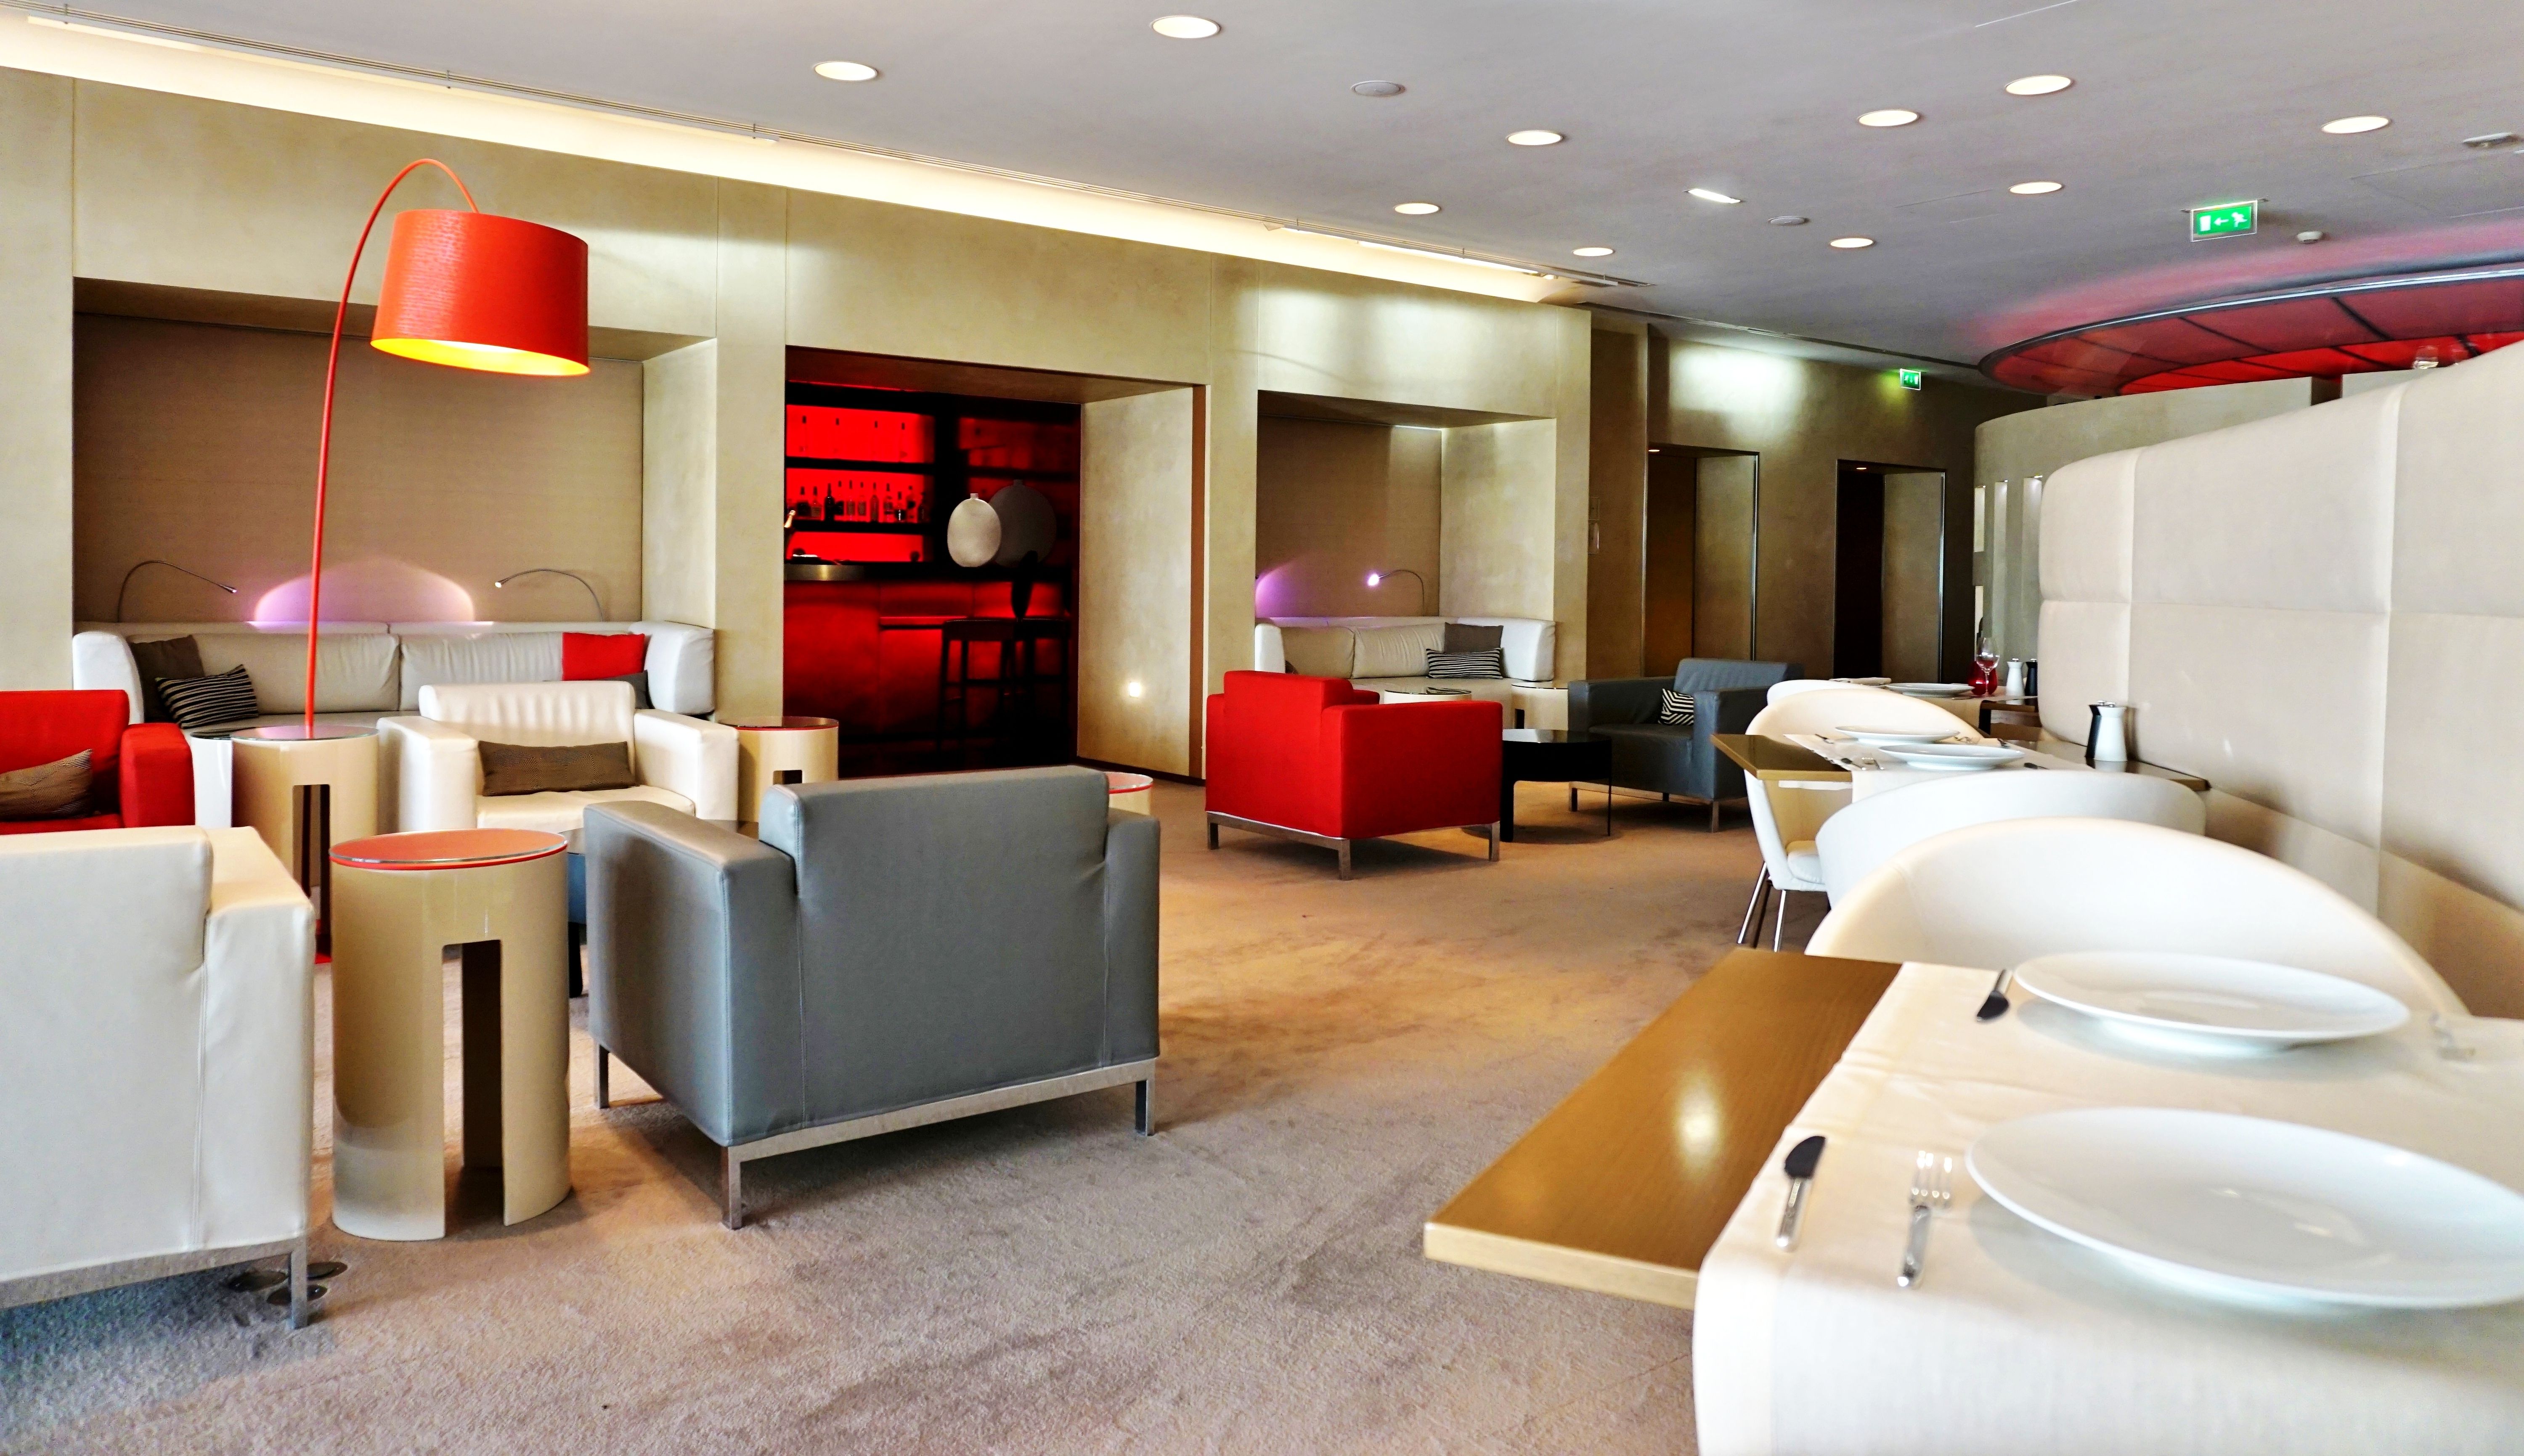 The La Premiere lounge at CDG airport